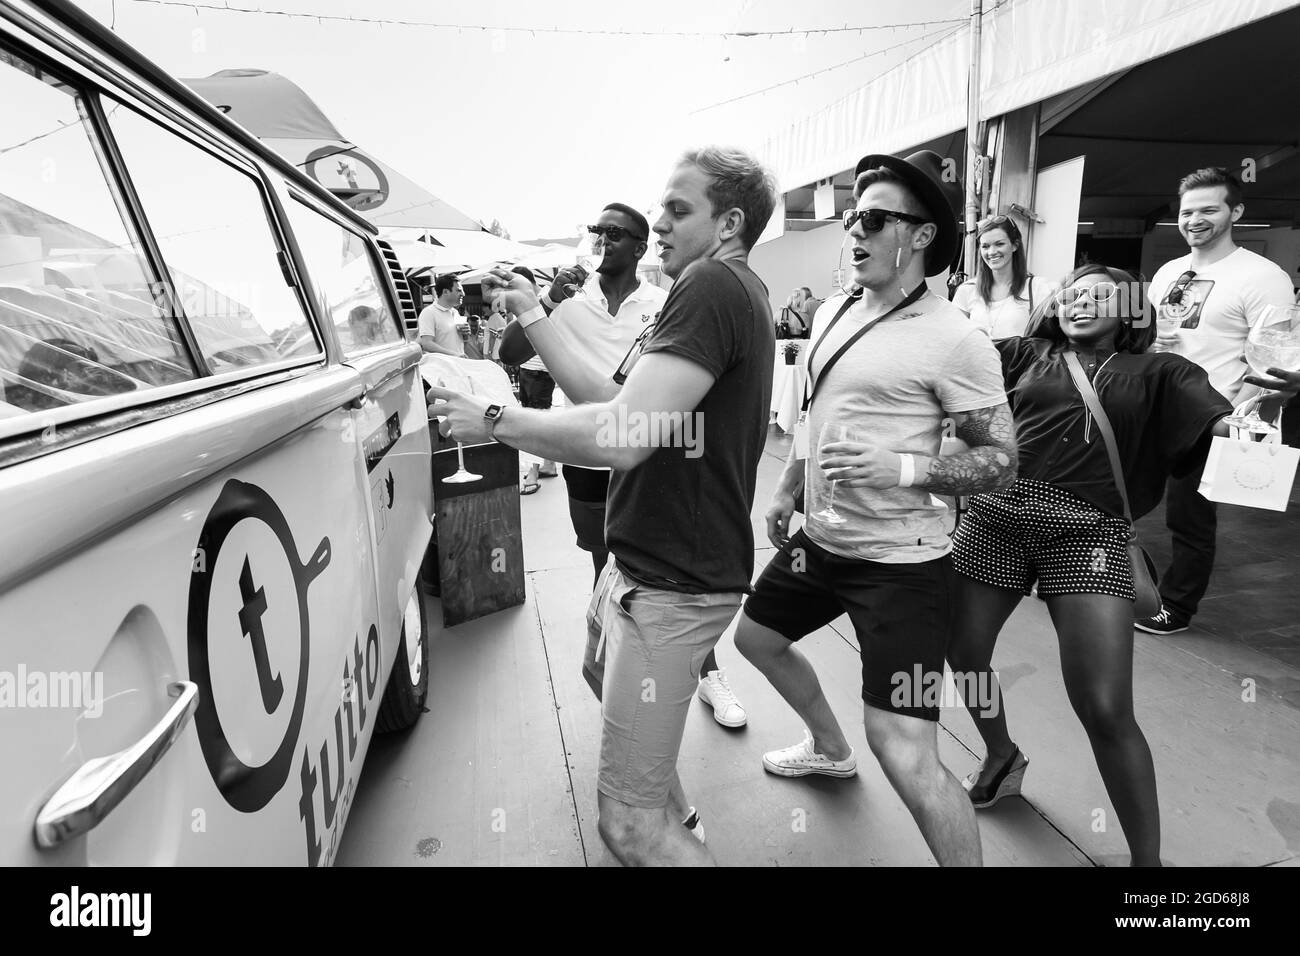 JOHANNESBURG, SOUTH AFRICA - Jan 05, 2021: A grayscale of people excitedly queuing in front of a catering truck at a Food and Wine Fair Stock Photo